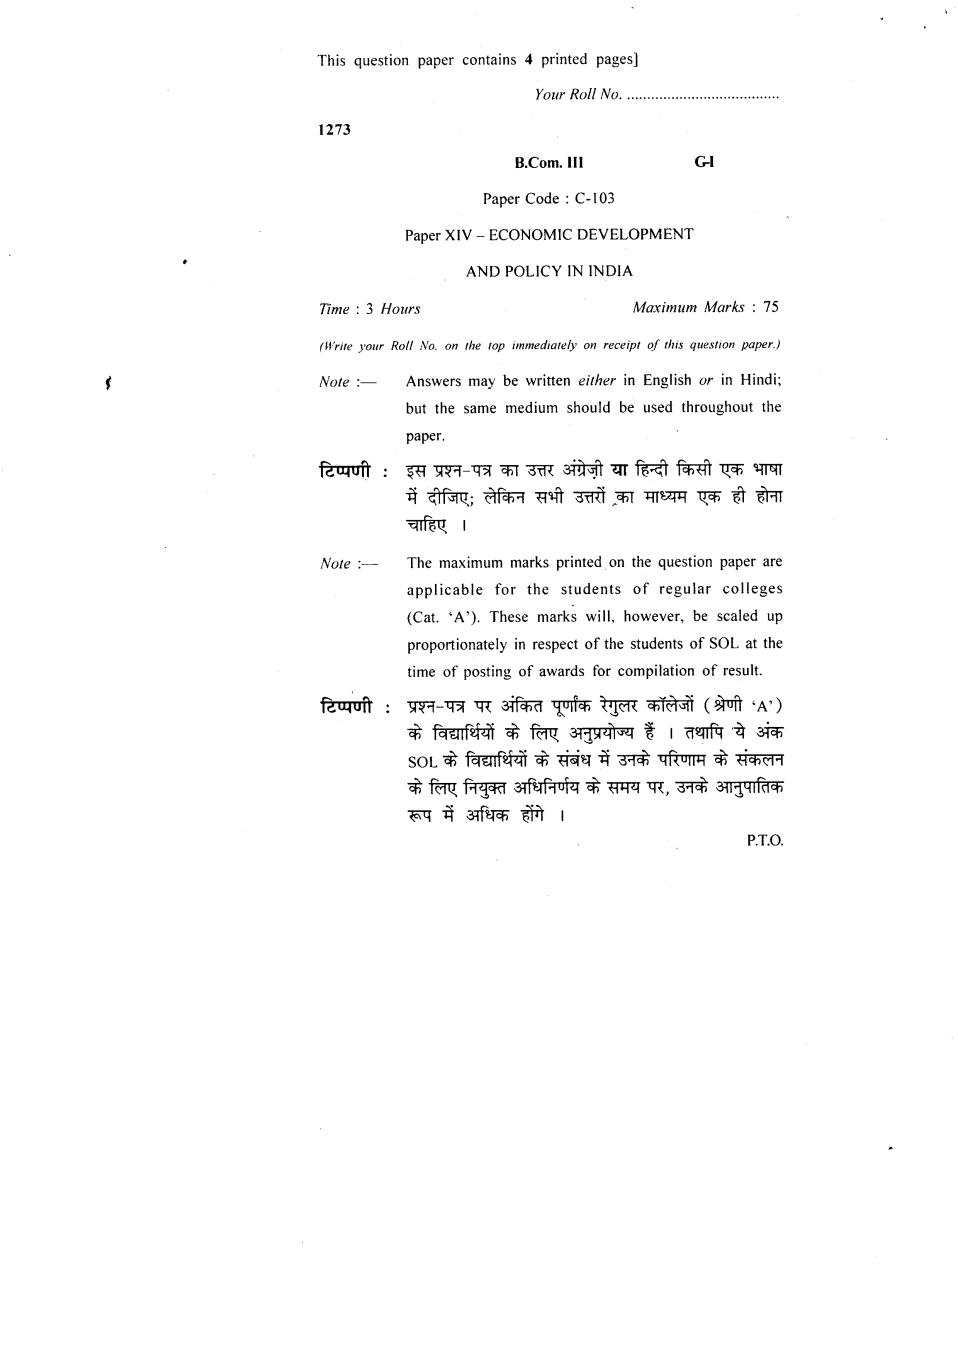 DU SOL B.Com Question Paper 3rd Year 2018 Economic Development and Policy in India - Page 1